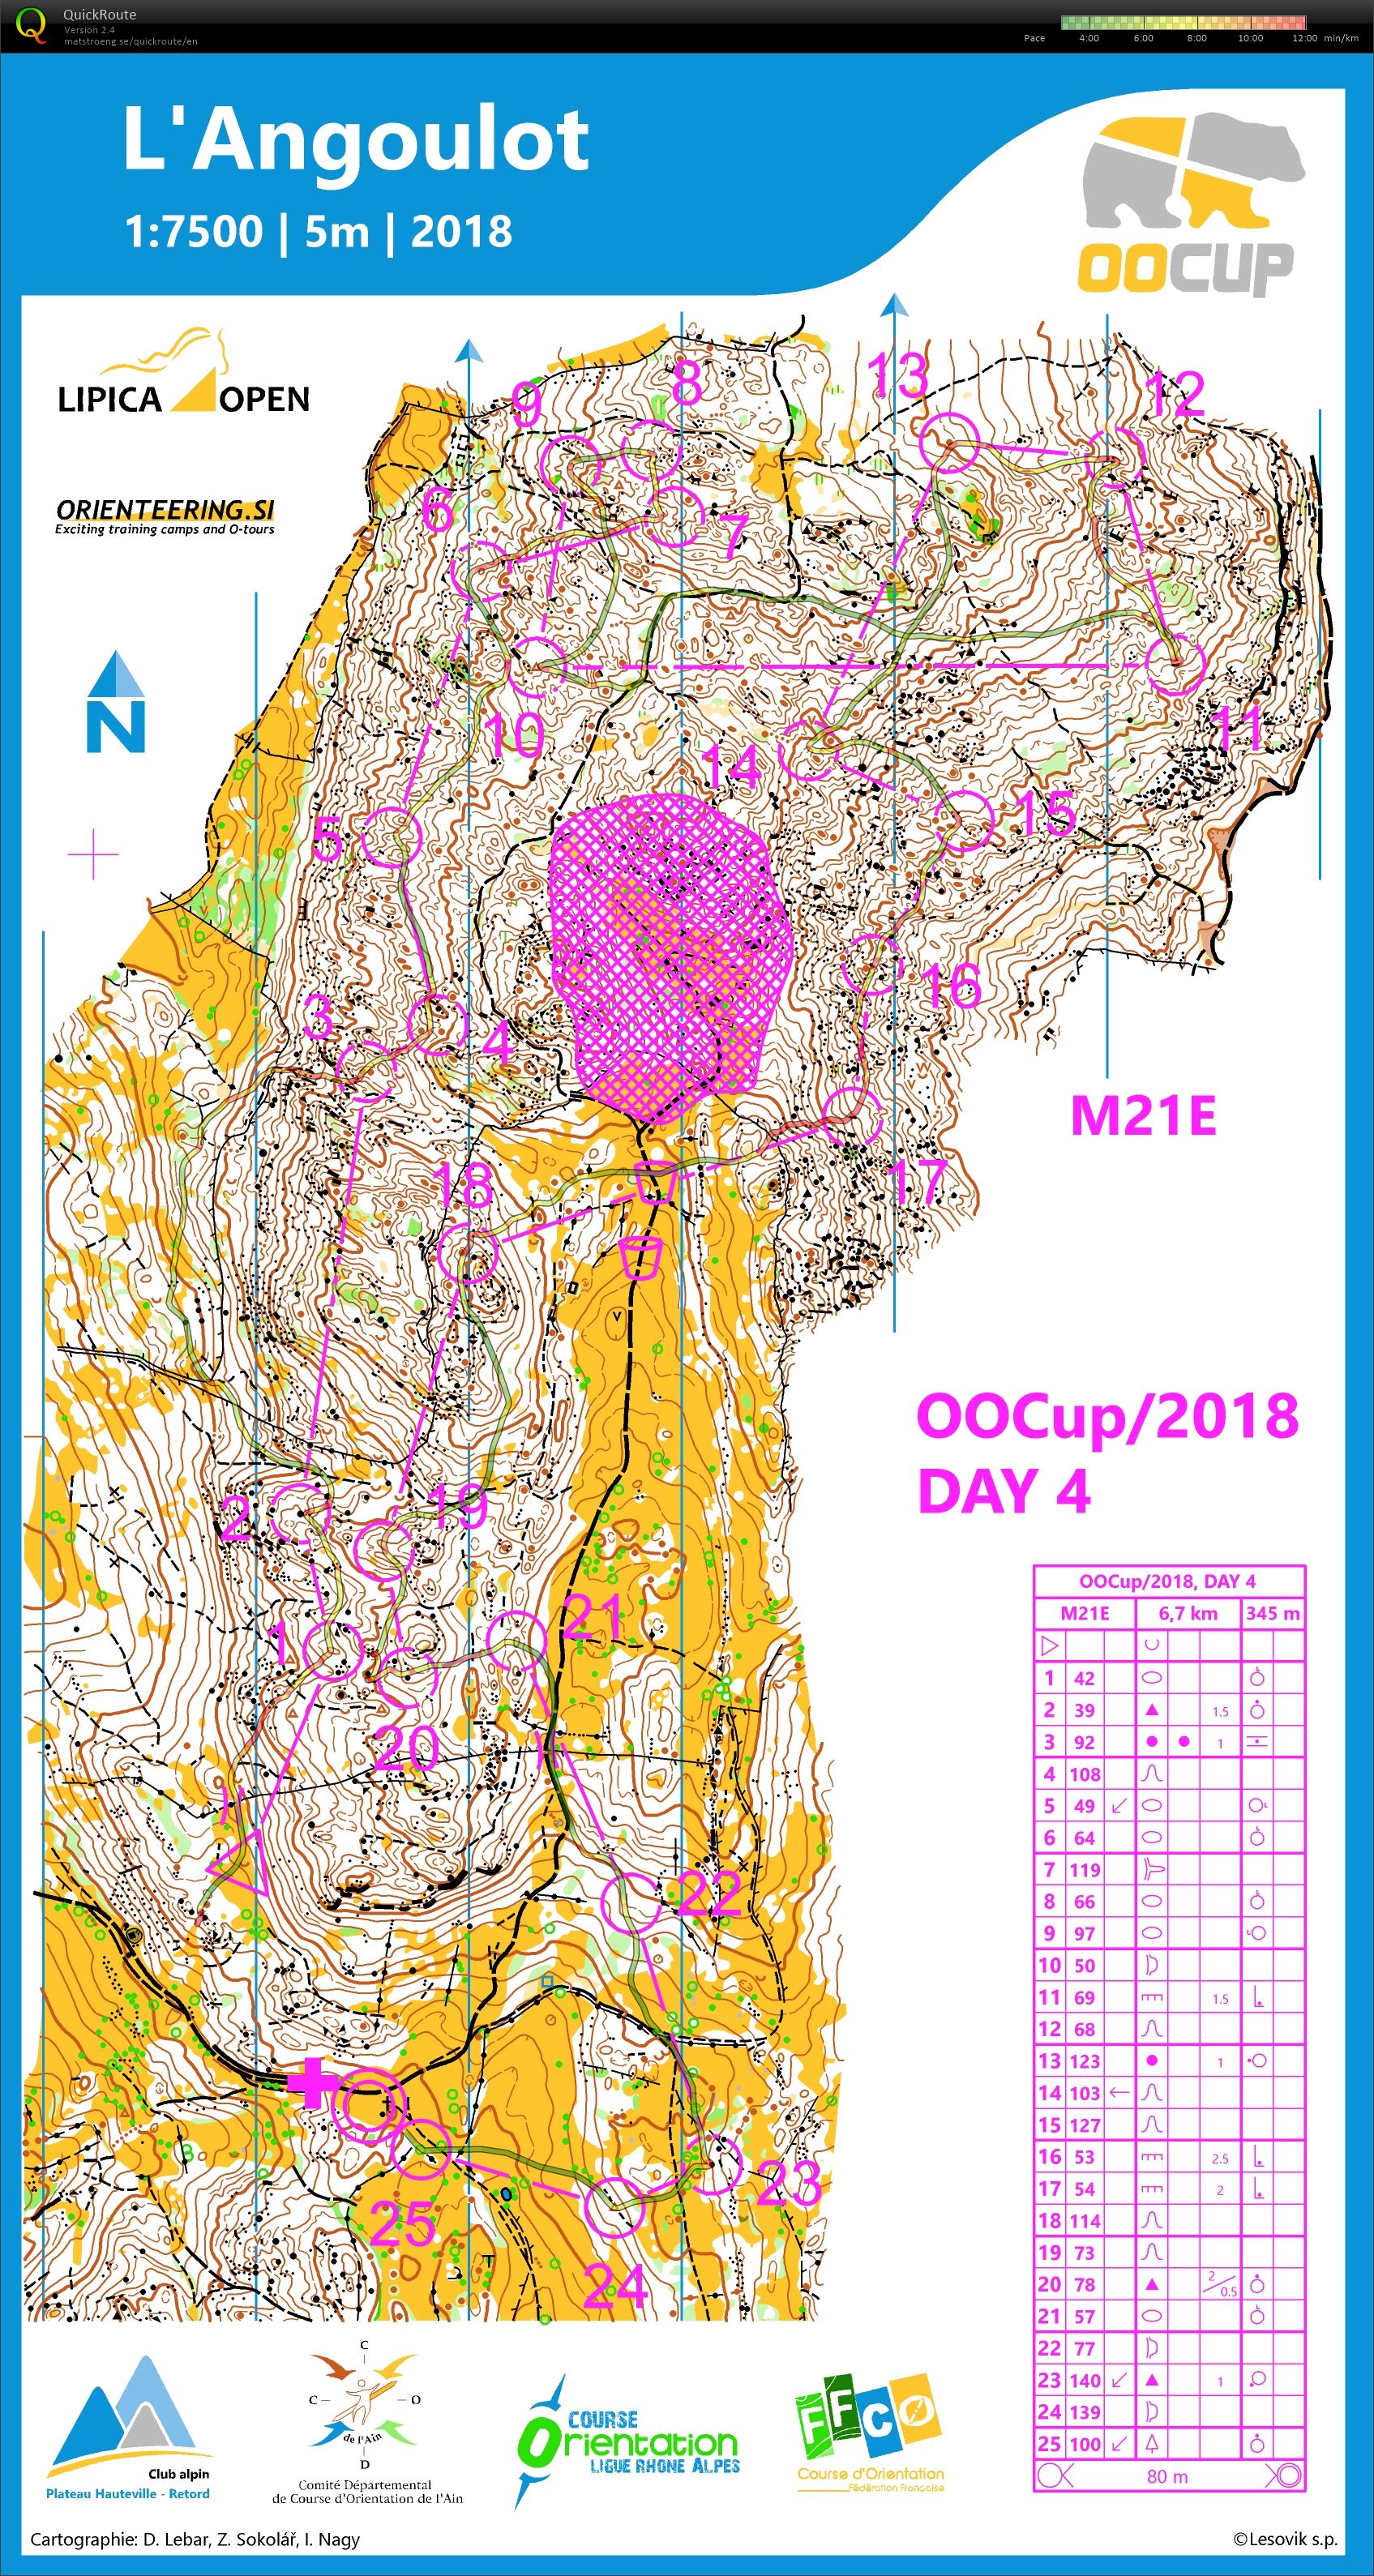 OOCup Stage 4 (28-07-2018)